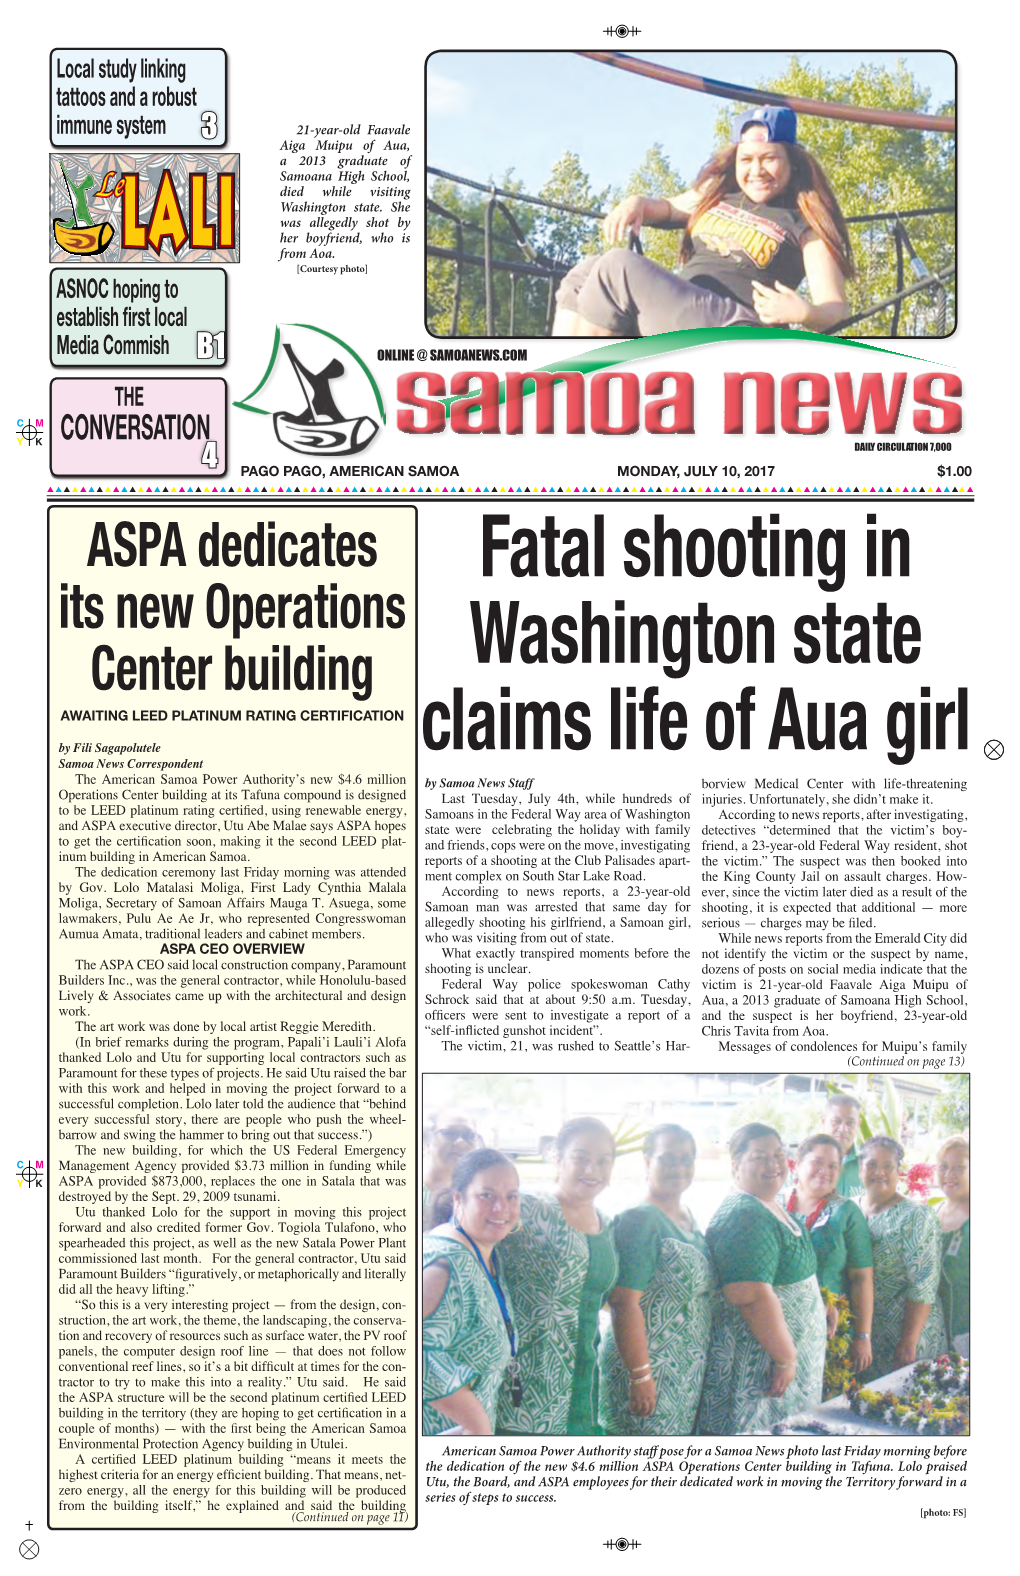 Fatal Shooting in Washington State Claims Life of Aua Girl